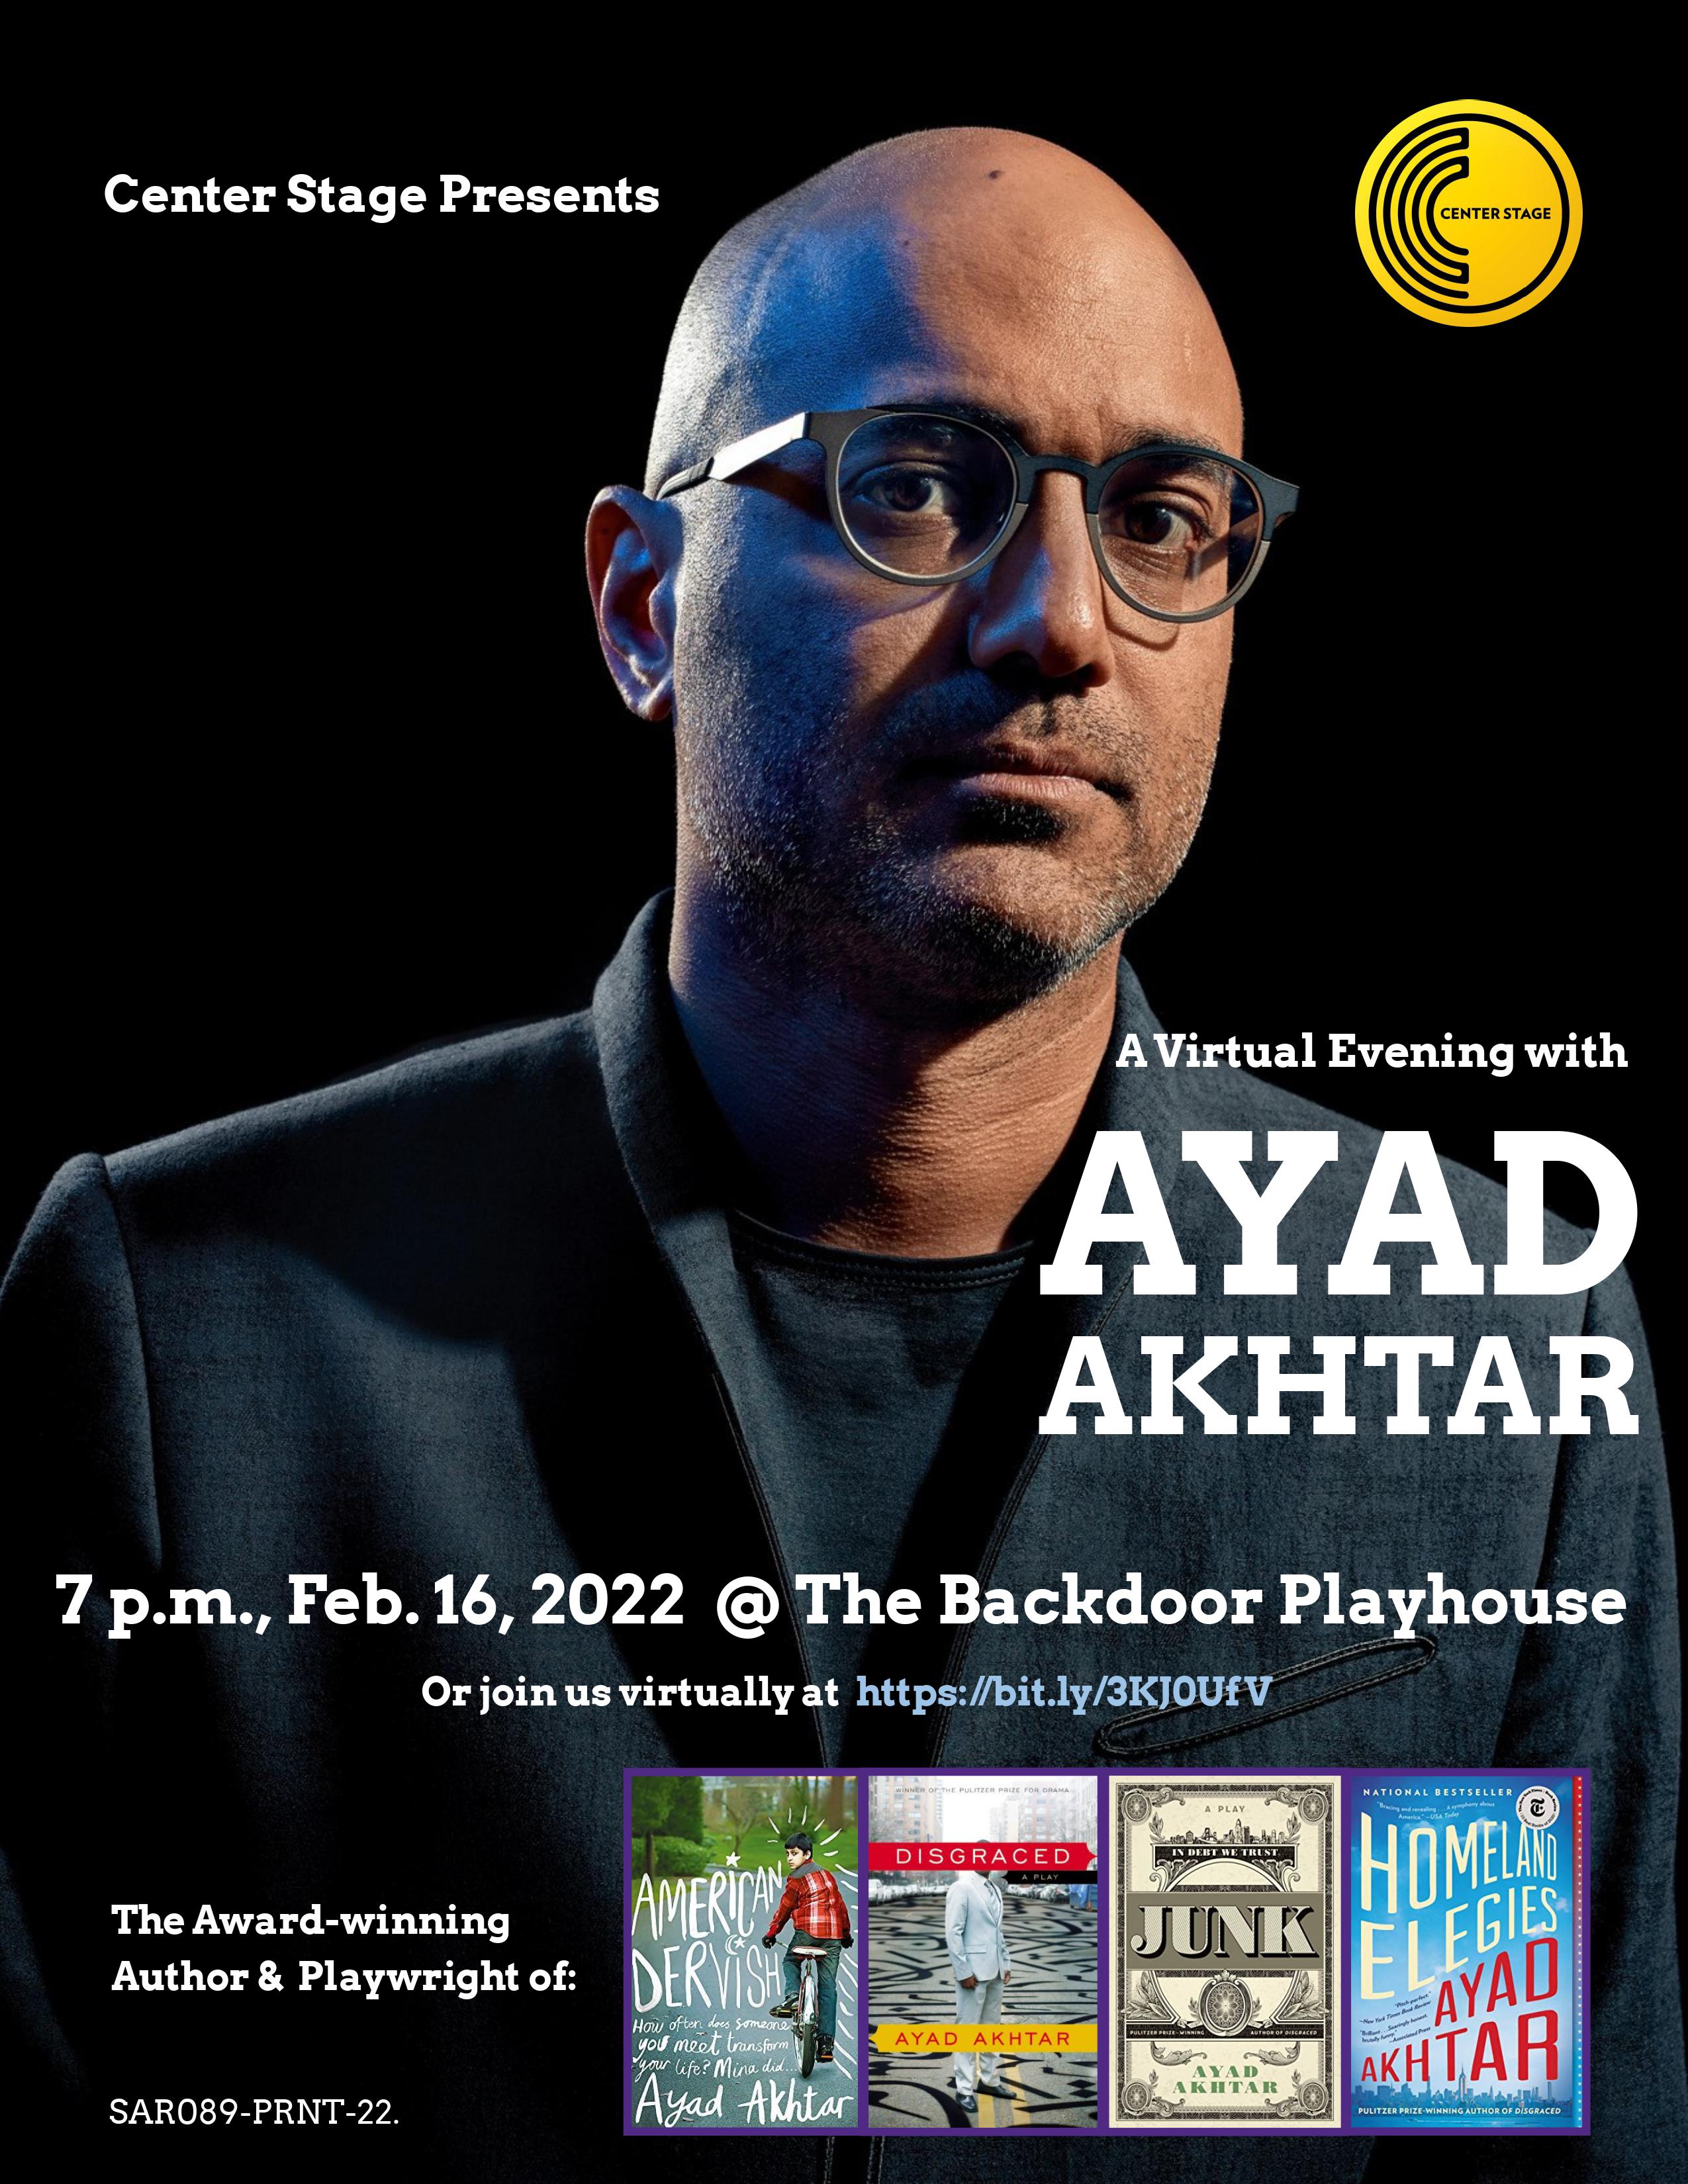 Center Stage Presents a virtual evening with Ayad Akhtar.